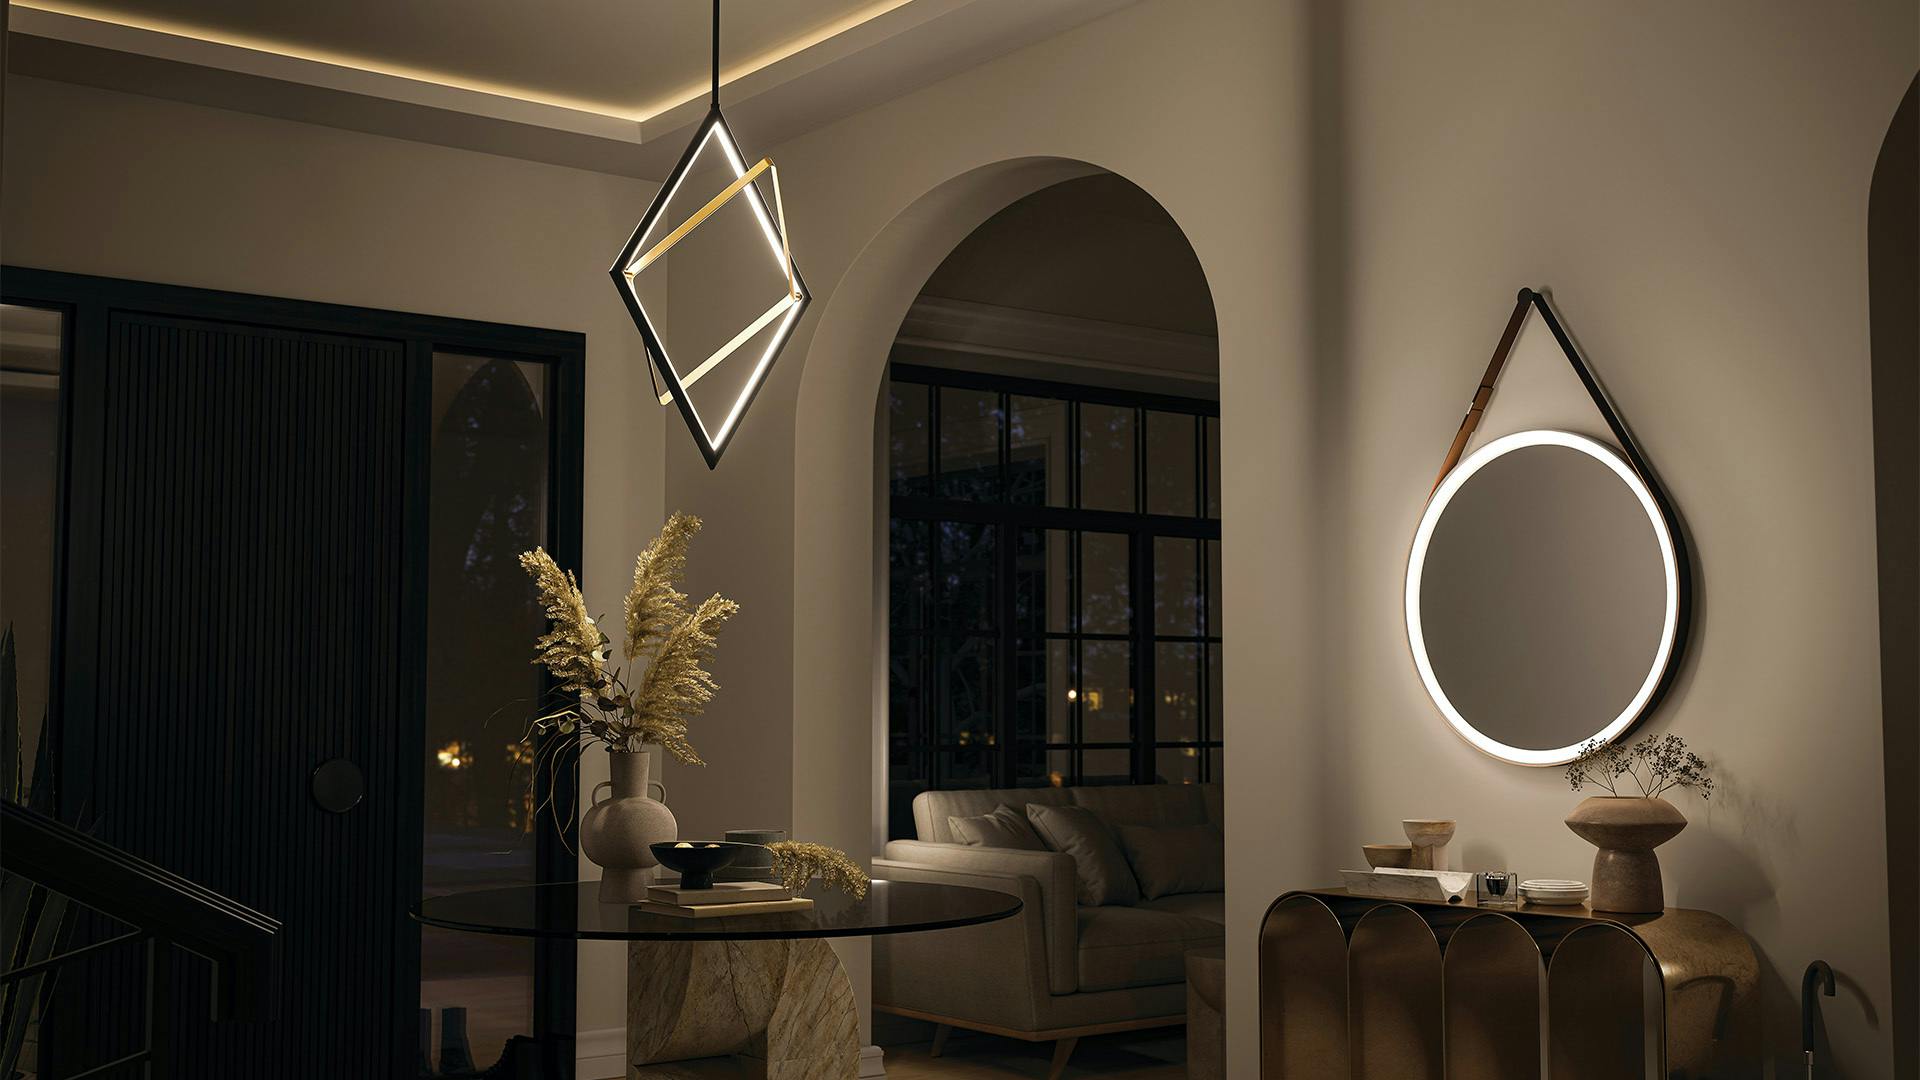 An interior entryway or foyer at night featuring a darski diamond pendant and round LED mirror on a wall.